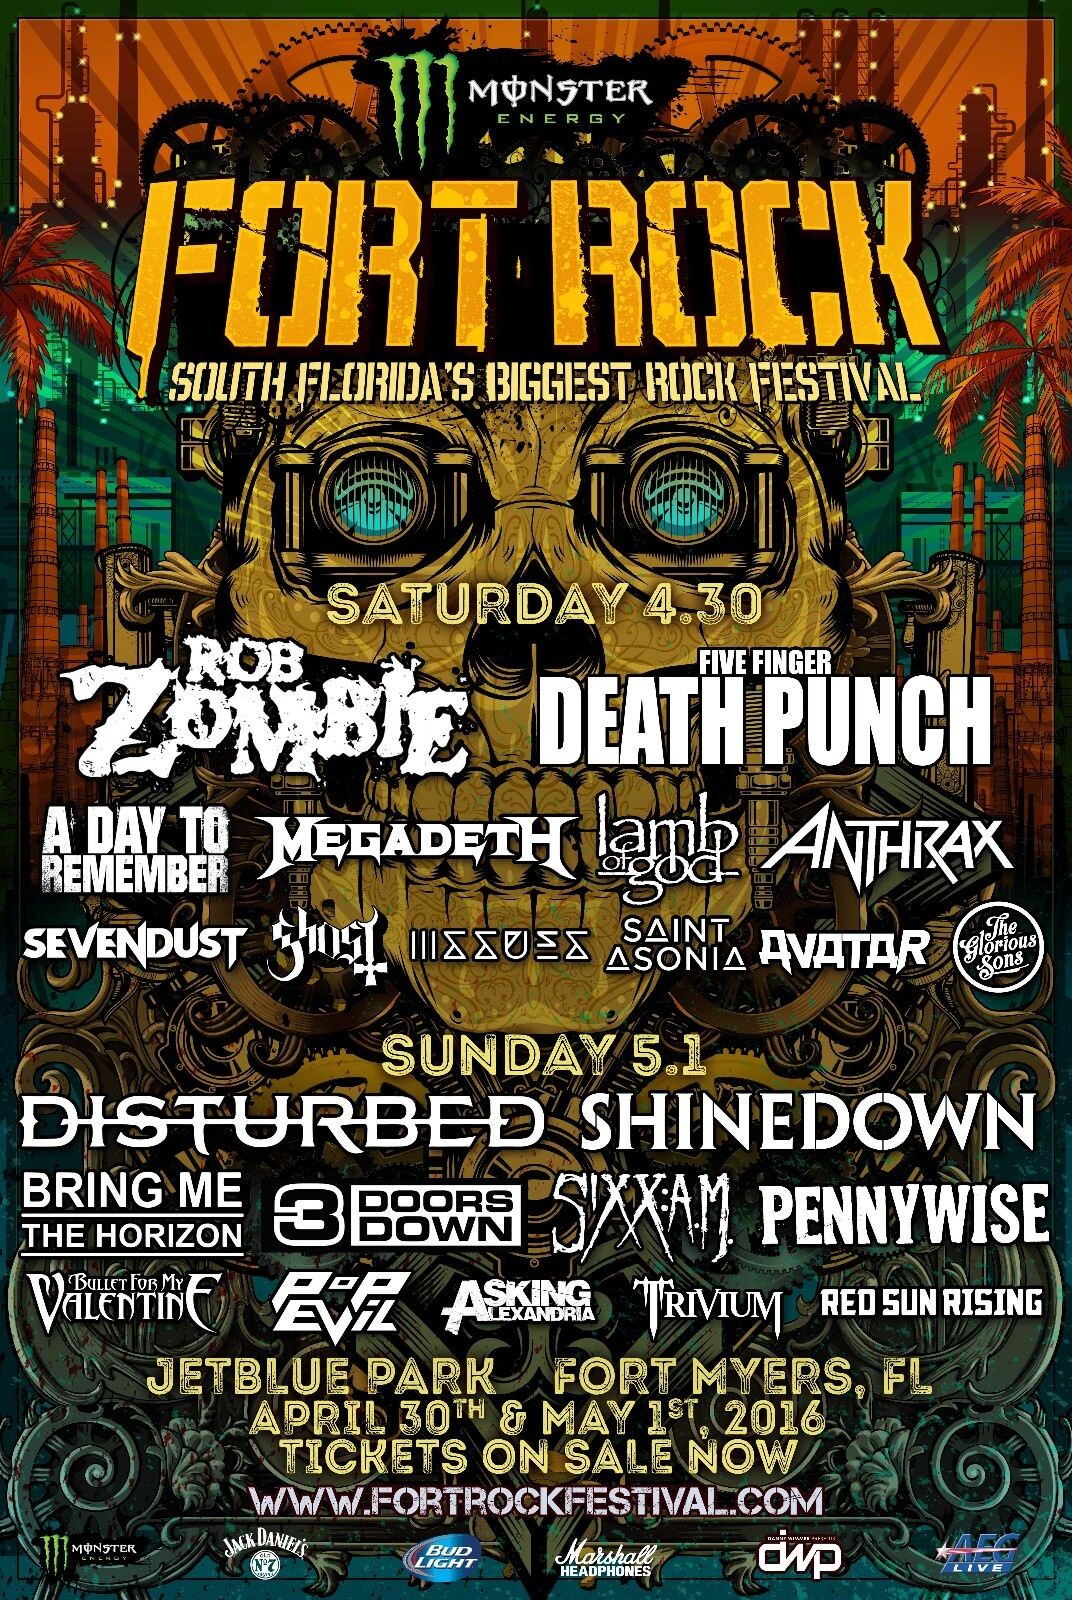 Fort Rock Festival 2016 Fort Myers Concert Tour Poster-rob Zombie,megadeth